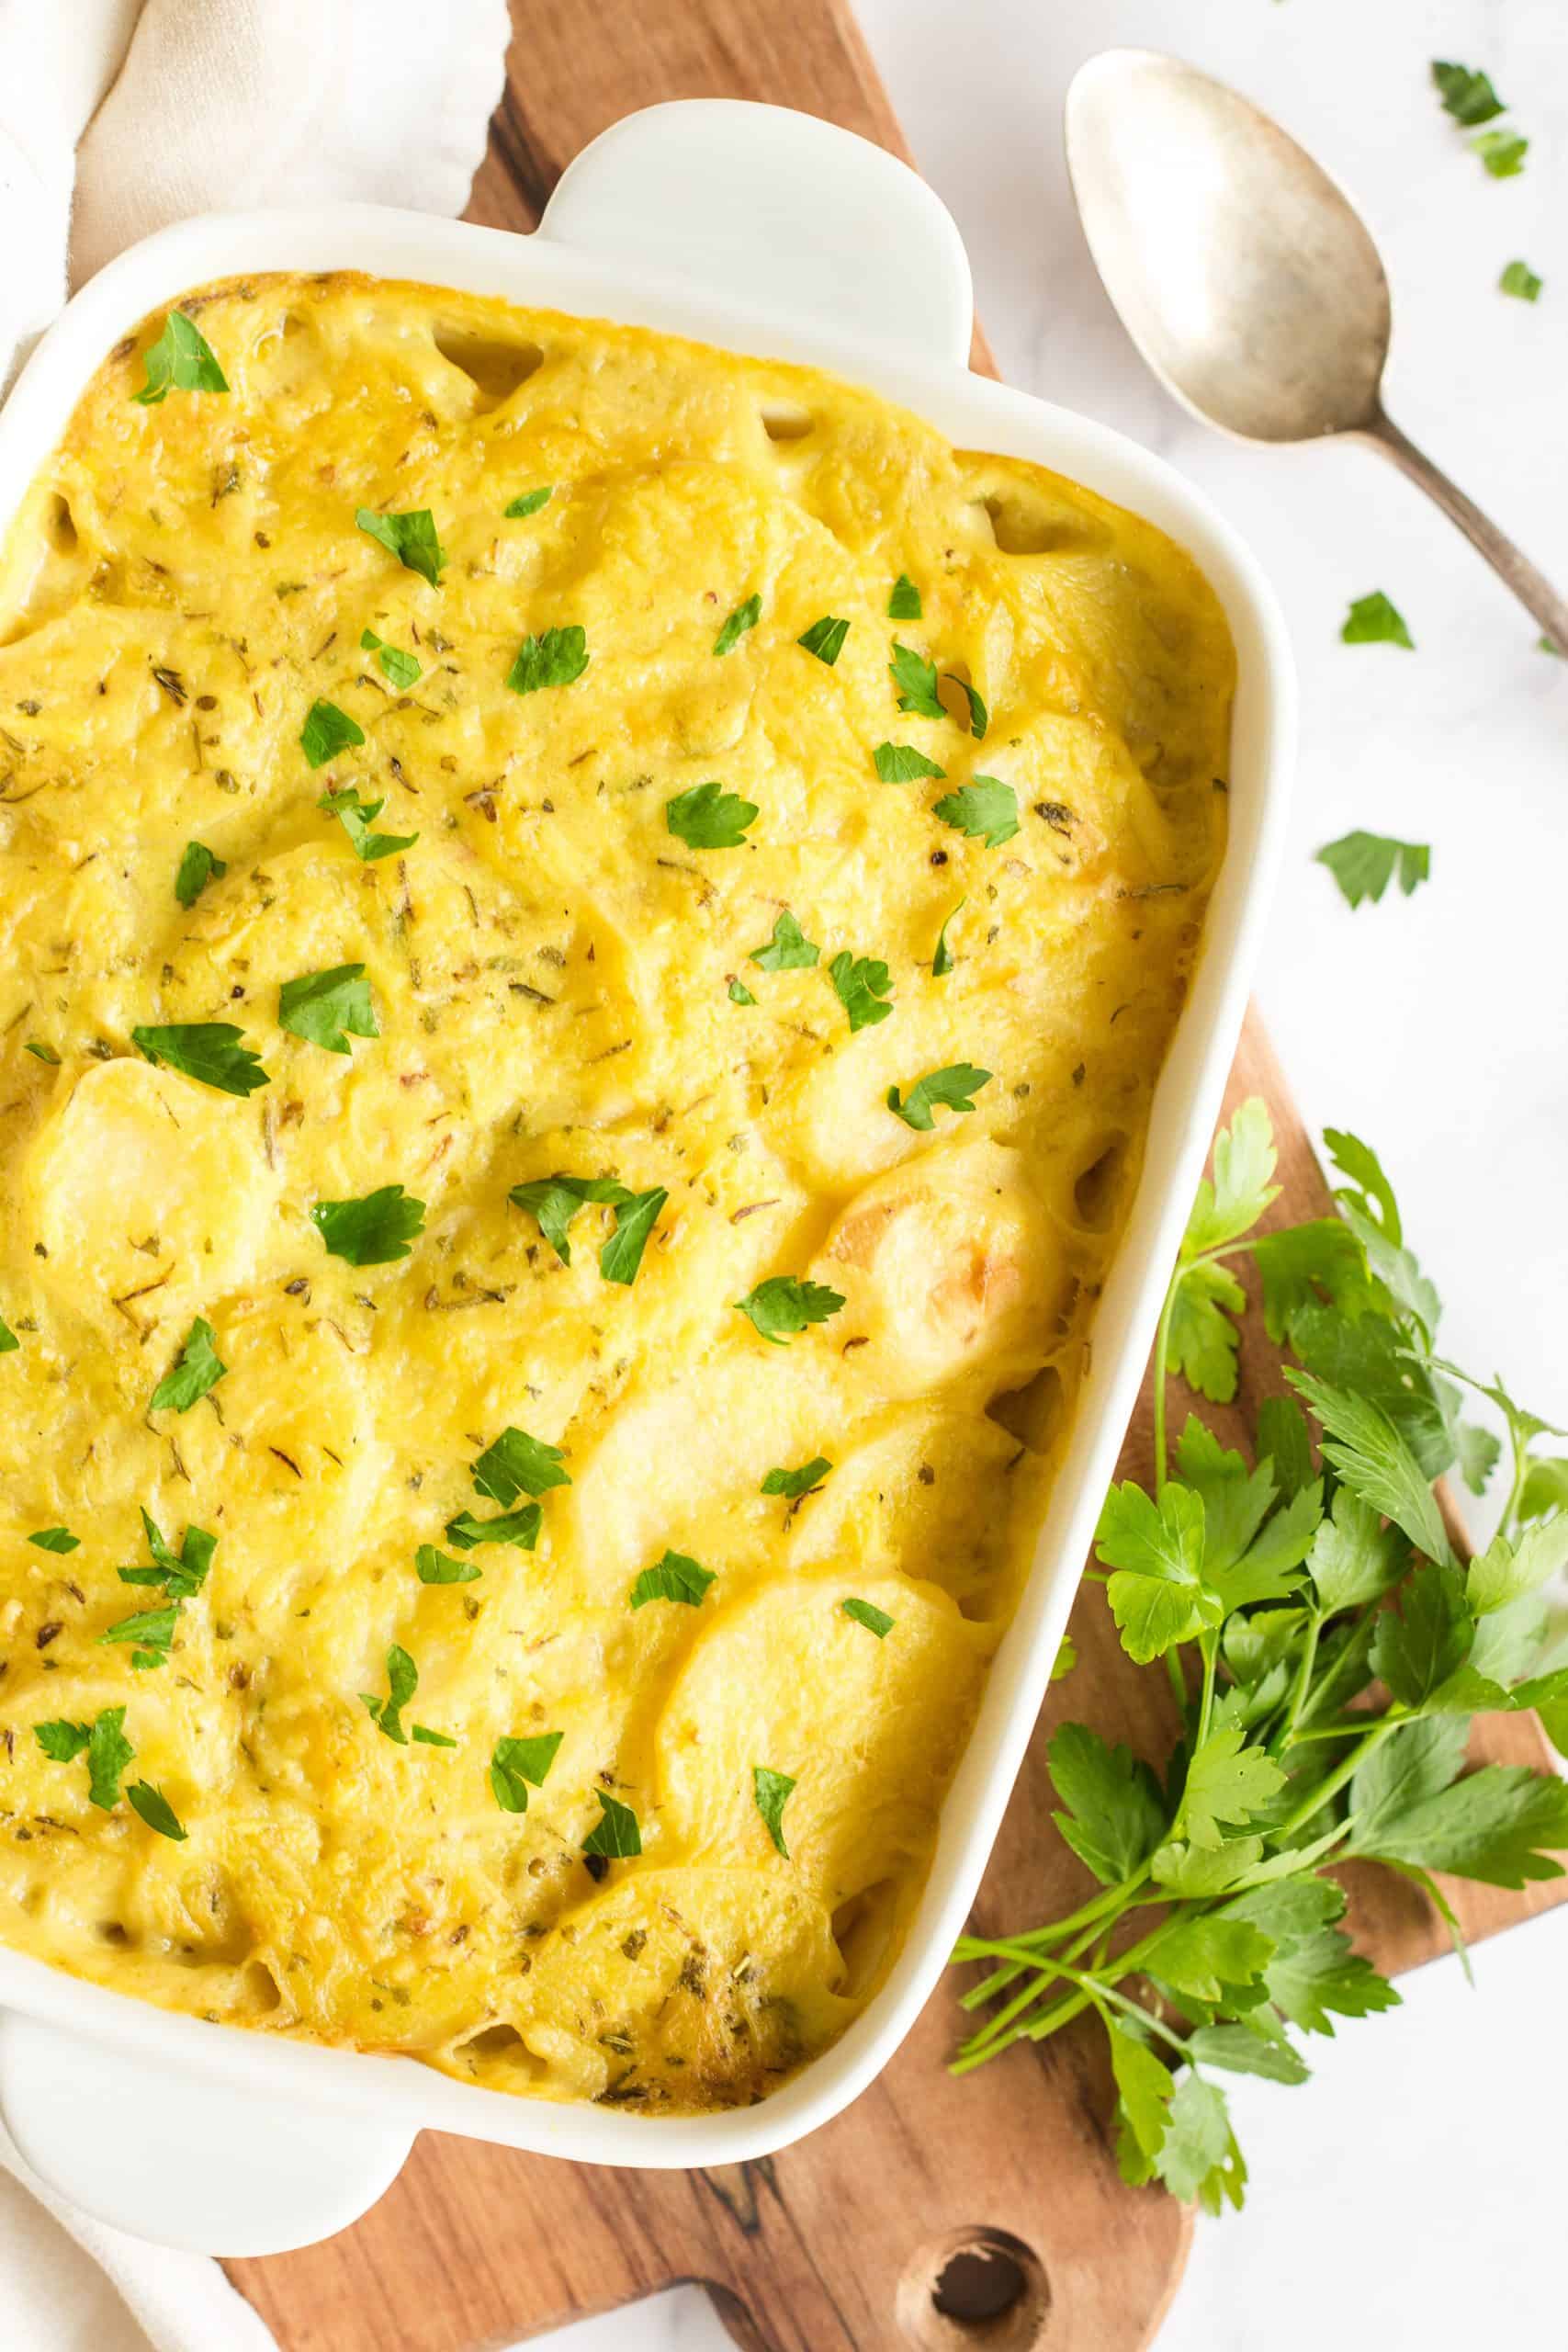 Creamy scalloped potatoes on a wooden board.